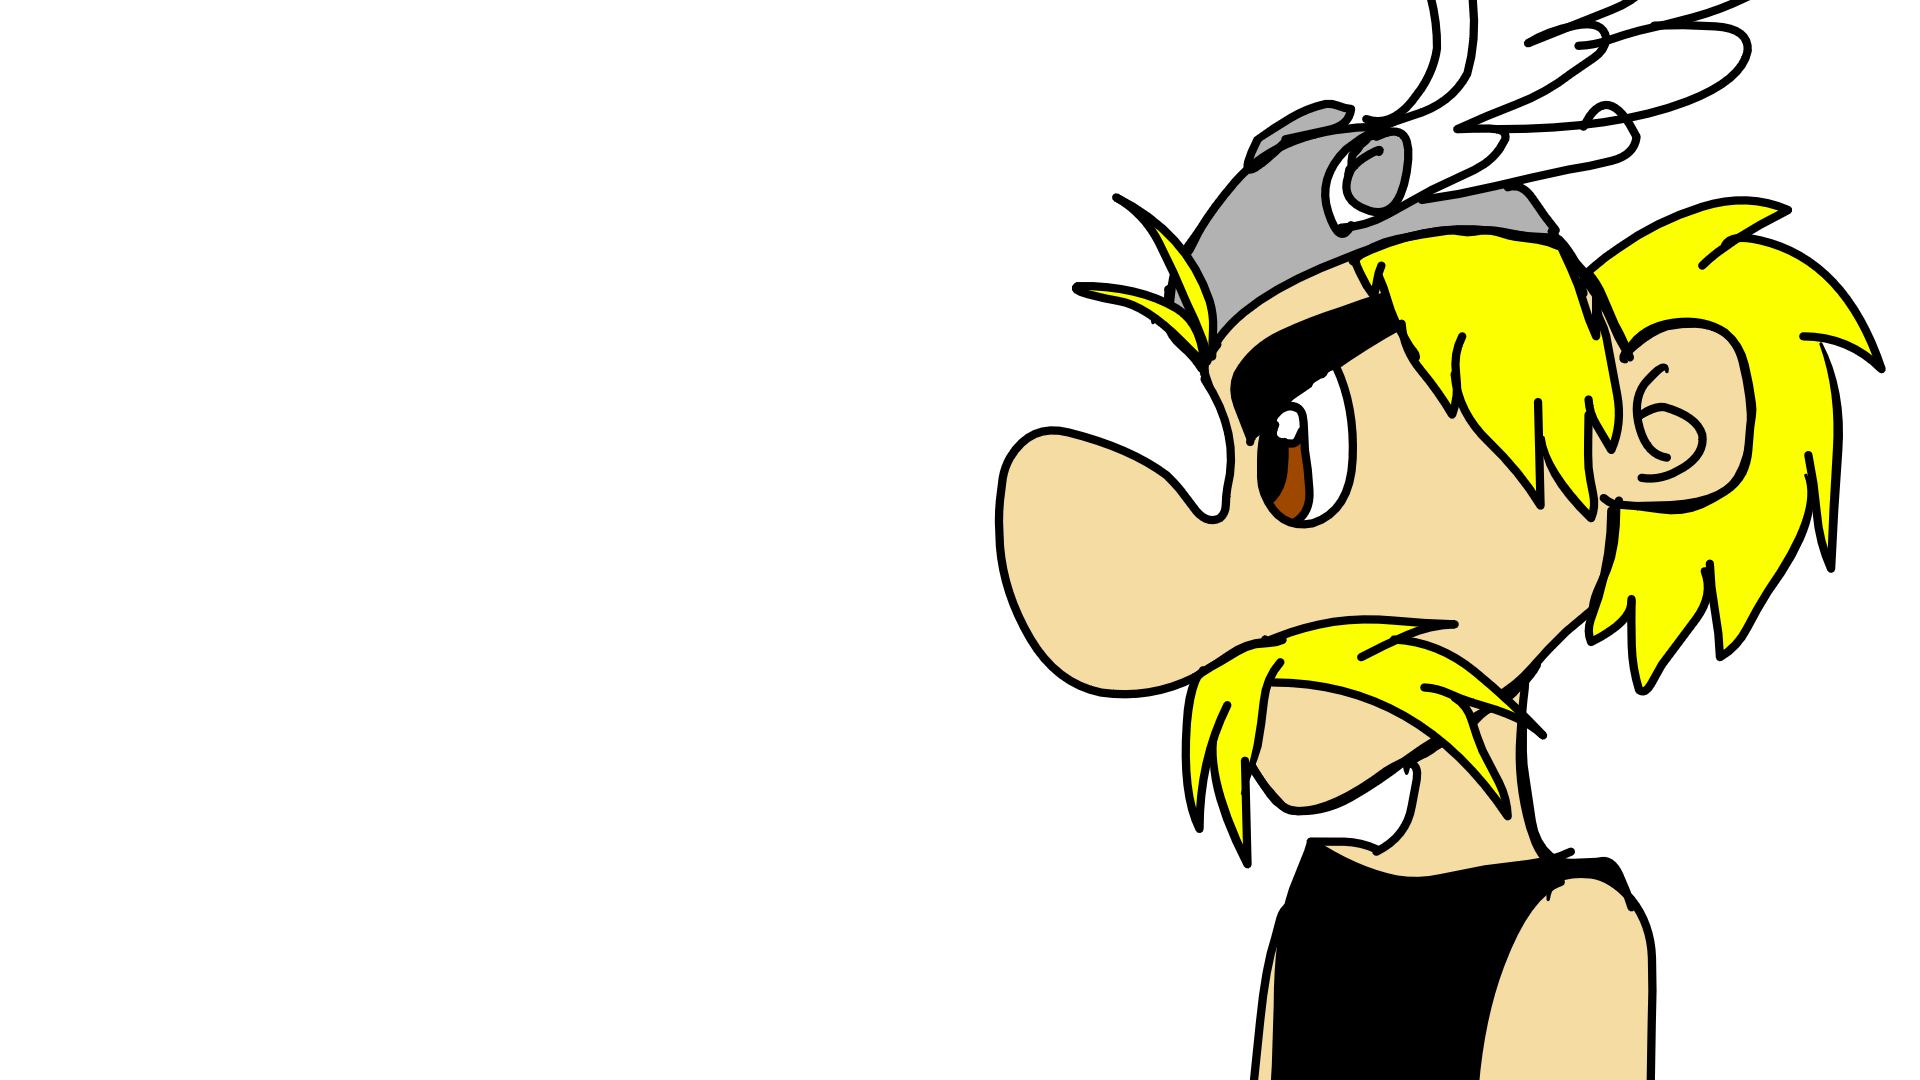 Asterix Gif by SnowyDrawings18 on DeviantArt